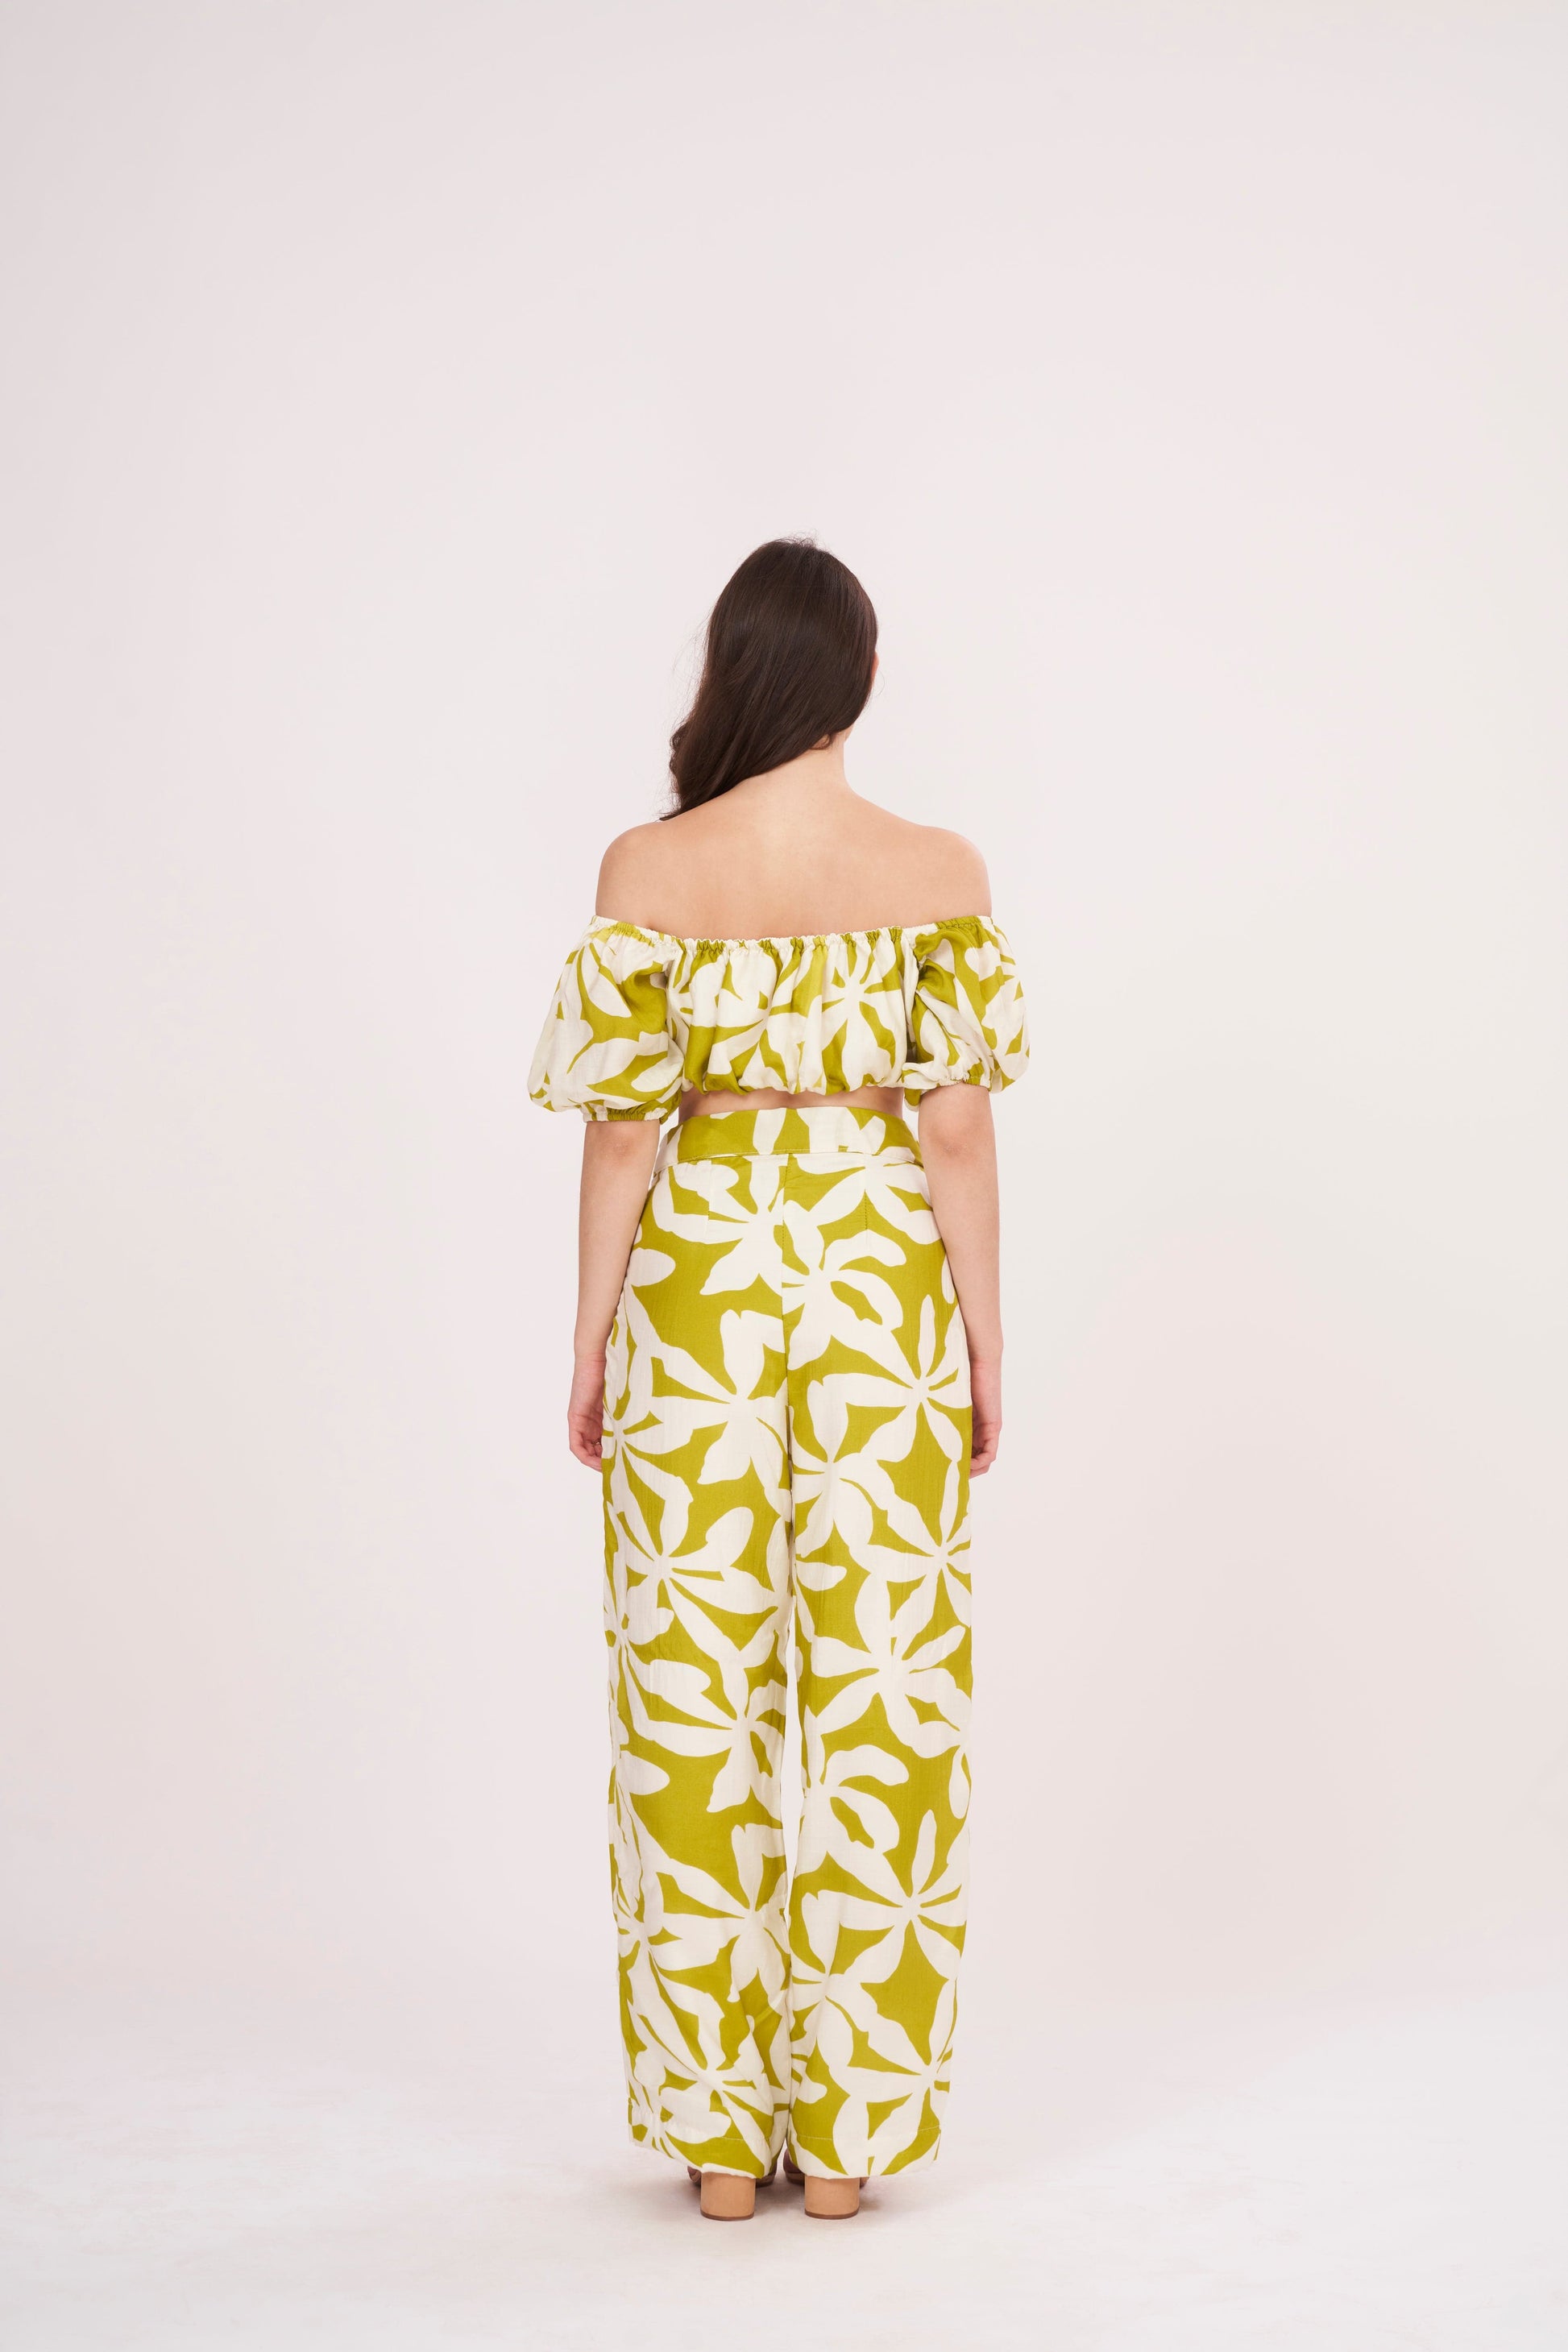 Green geometric print, loose-fit, wide-legged flowy trousers perfect for a breezy, relaxed feel during summer.